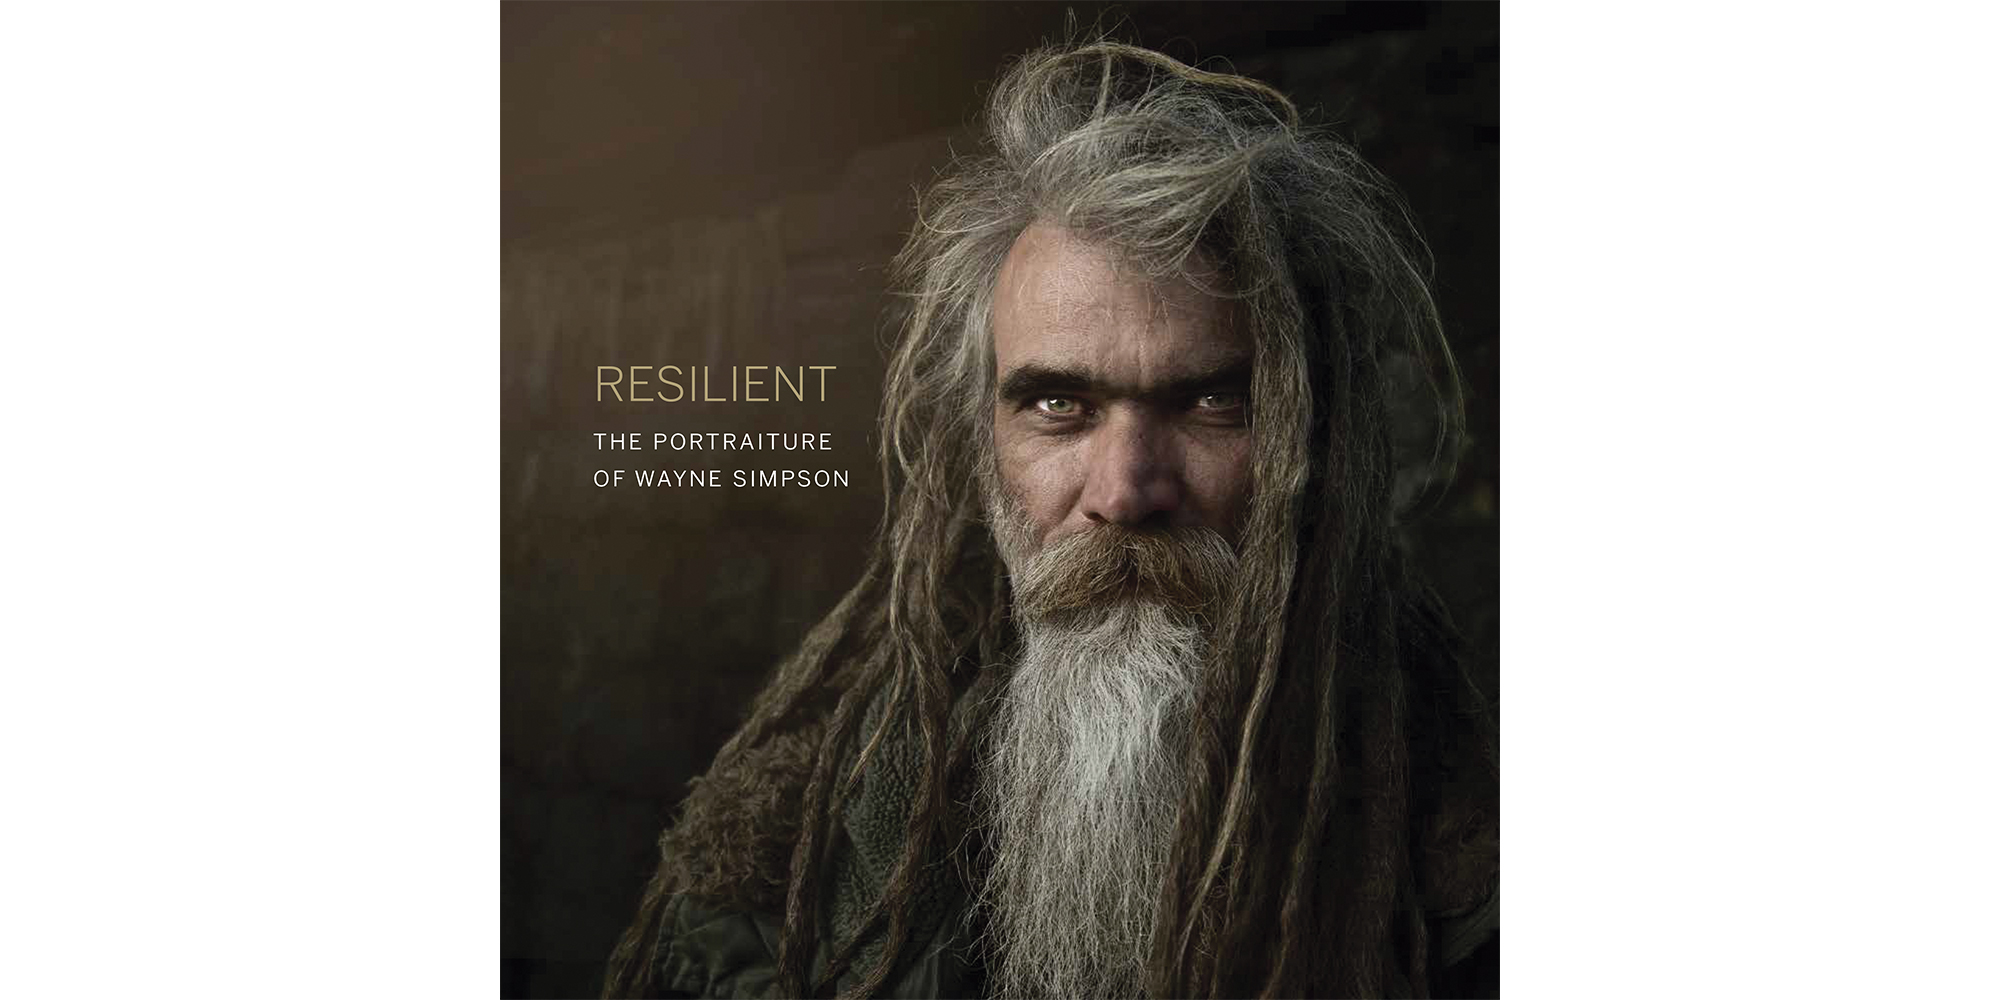 The cover of Wayne Simpson's Resilient